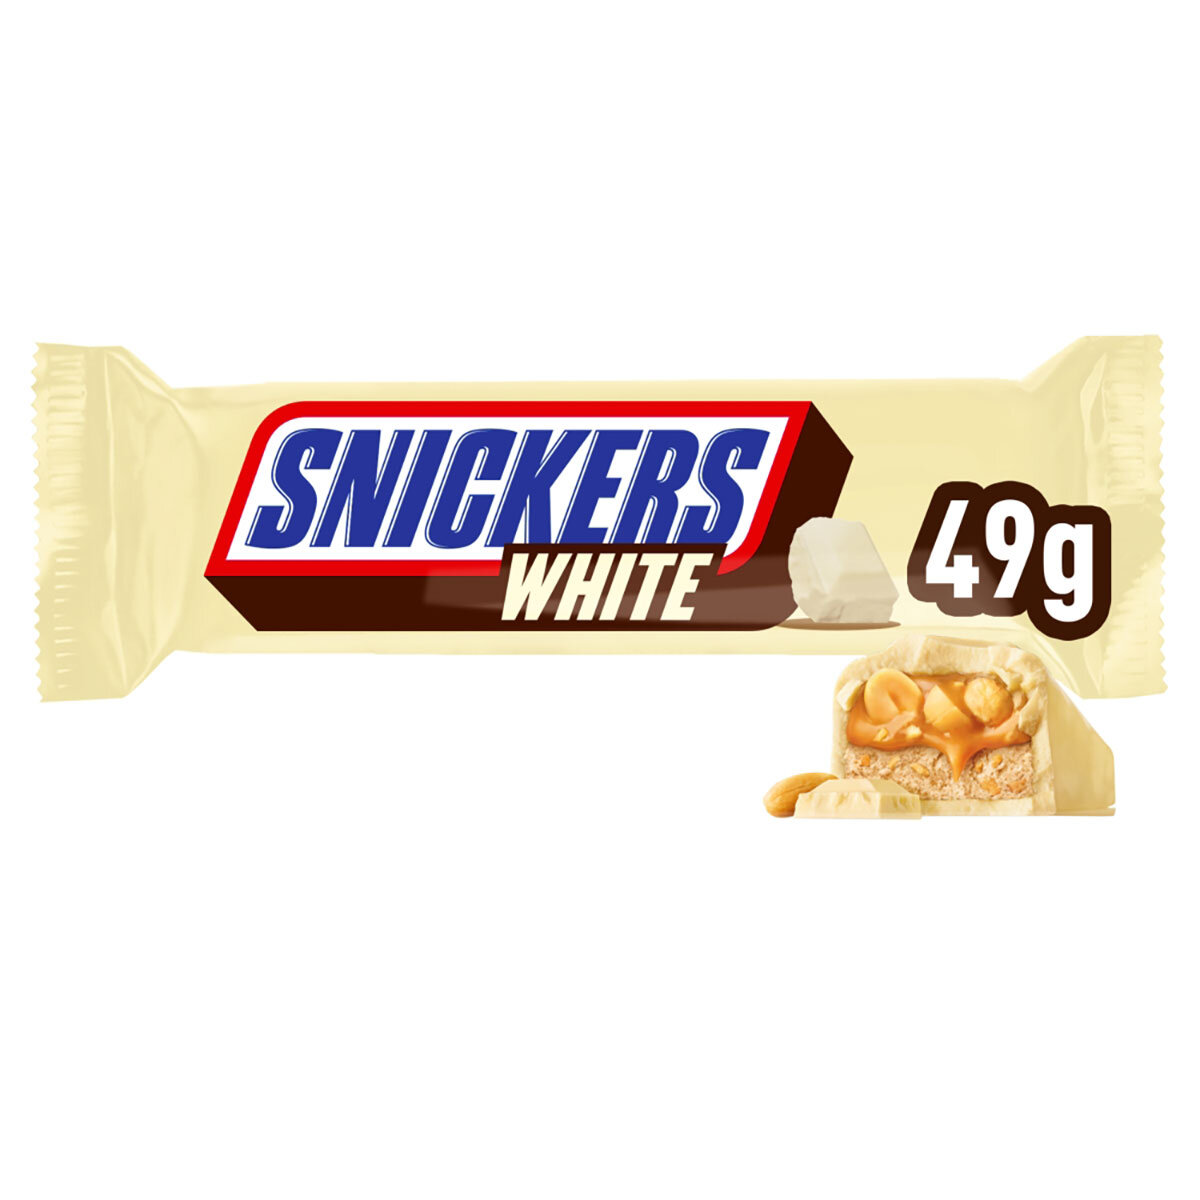 Snickers White, 49g